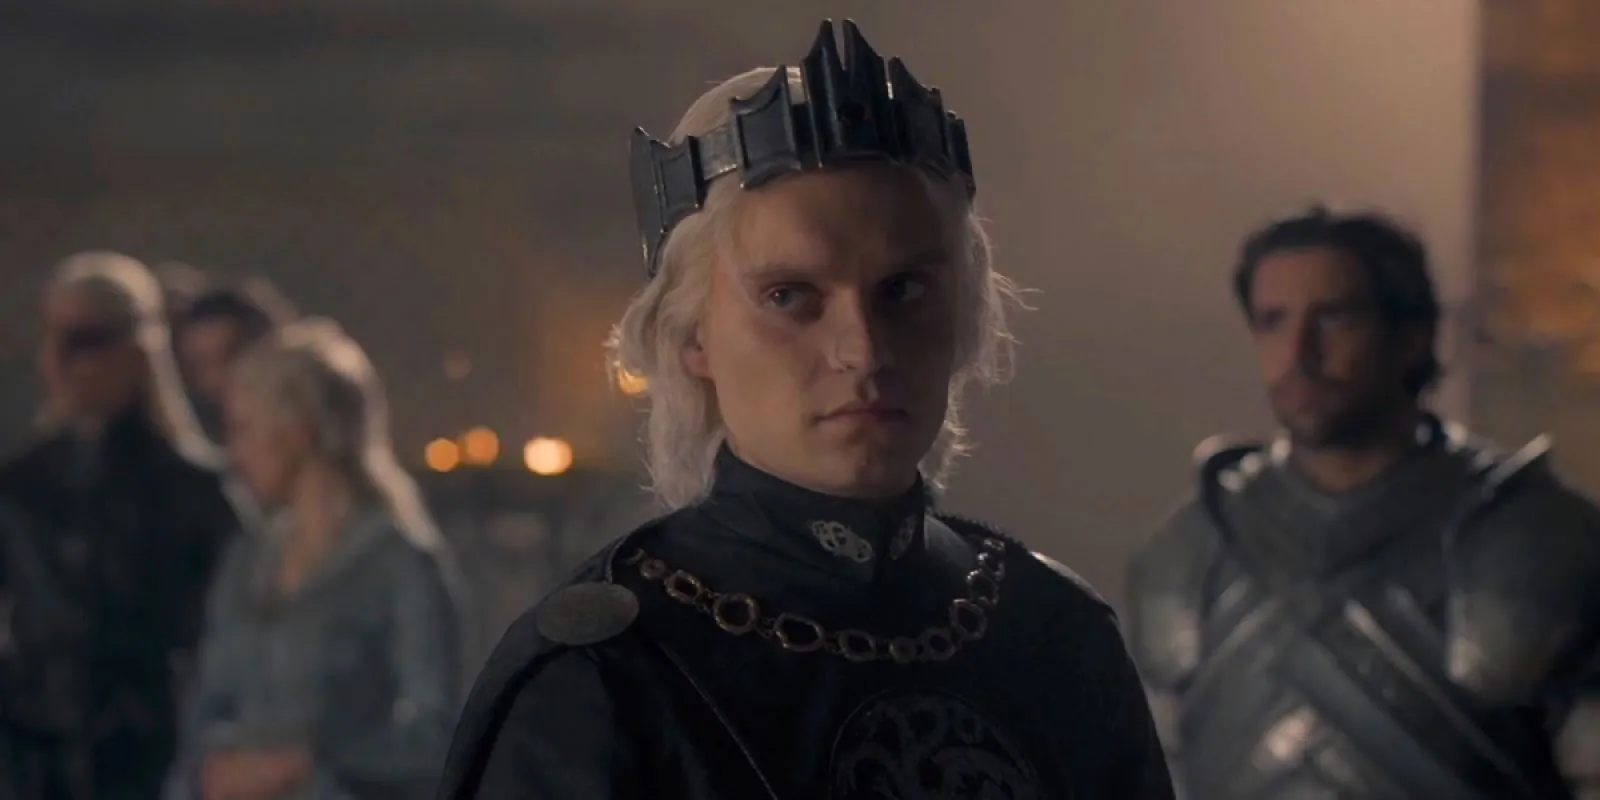 Aegon II Targaryen after his coronation in the Dragonpit in Episode 9 of House of the Dragon